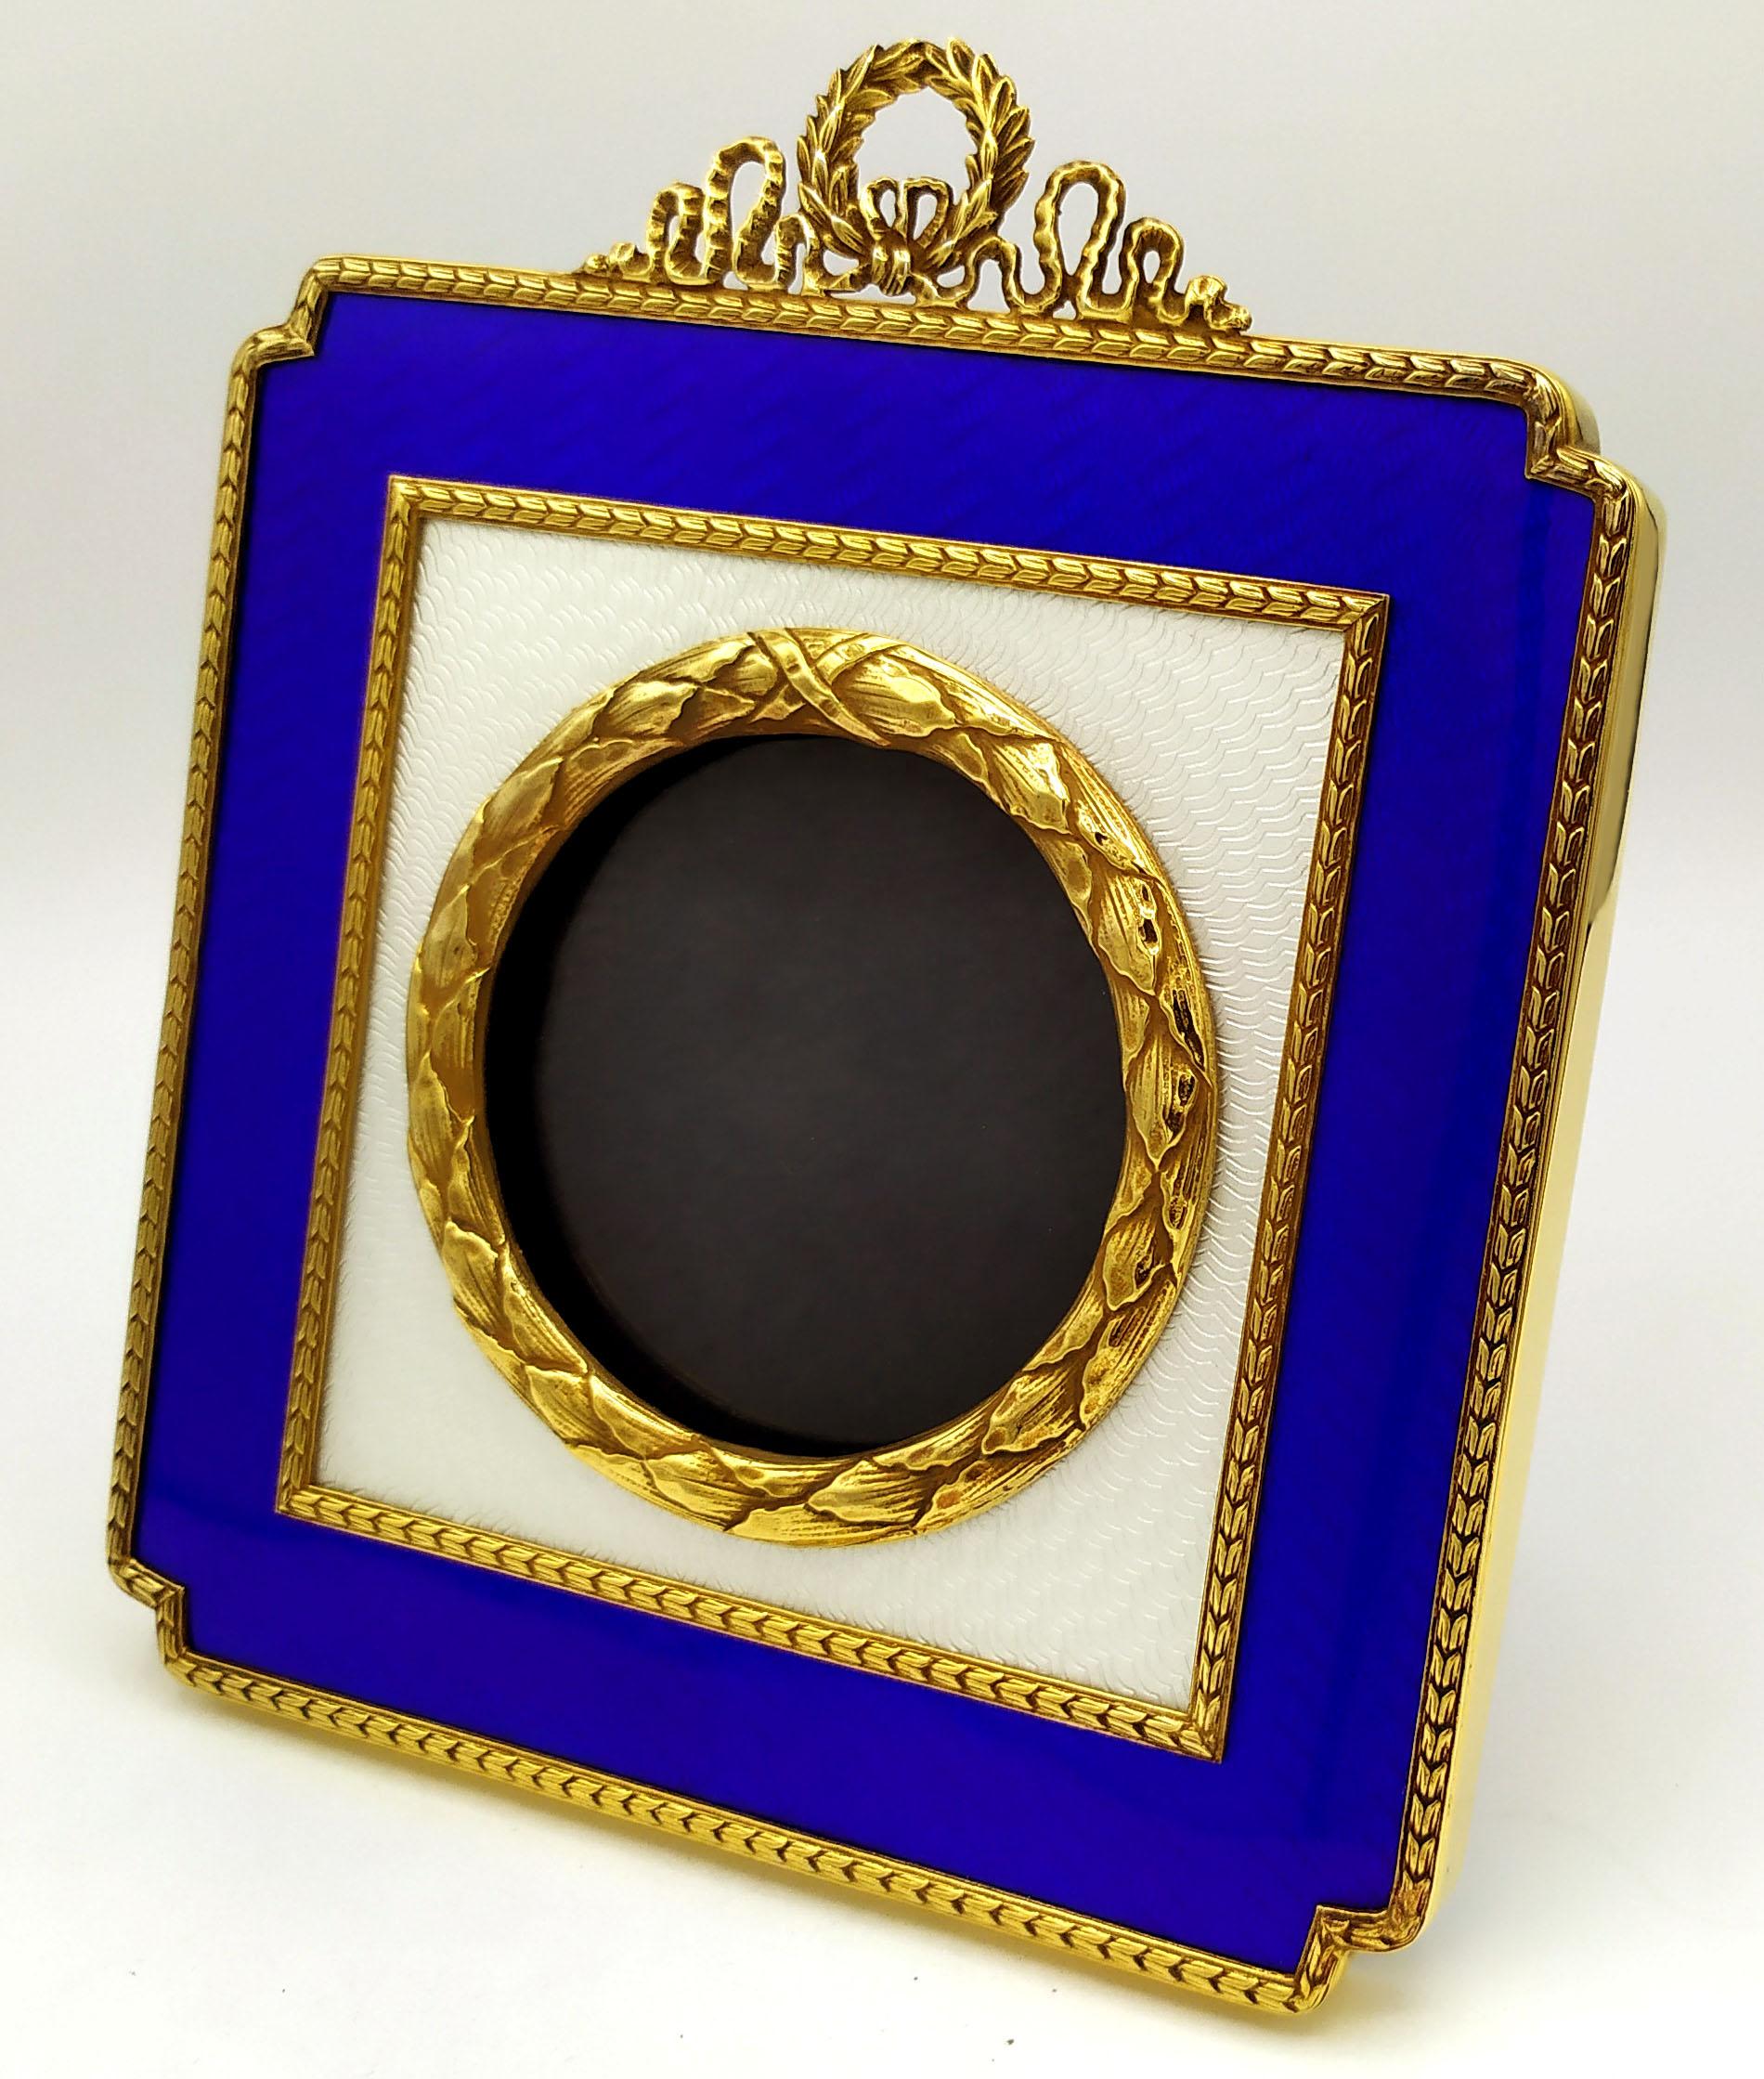 Napoleon III Square Table Frame White and Blue Sterling Silver Enamel Salimbeni For Sale